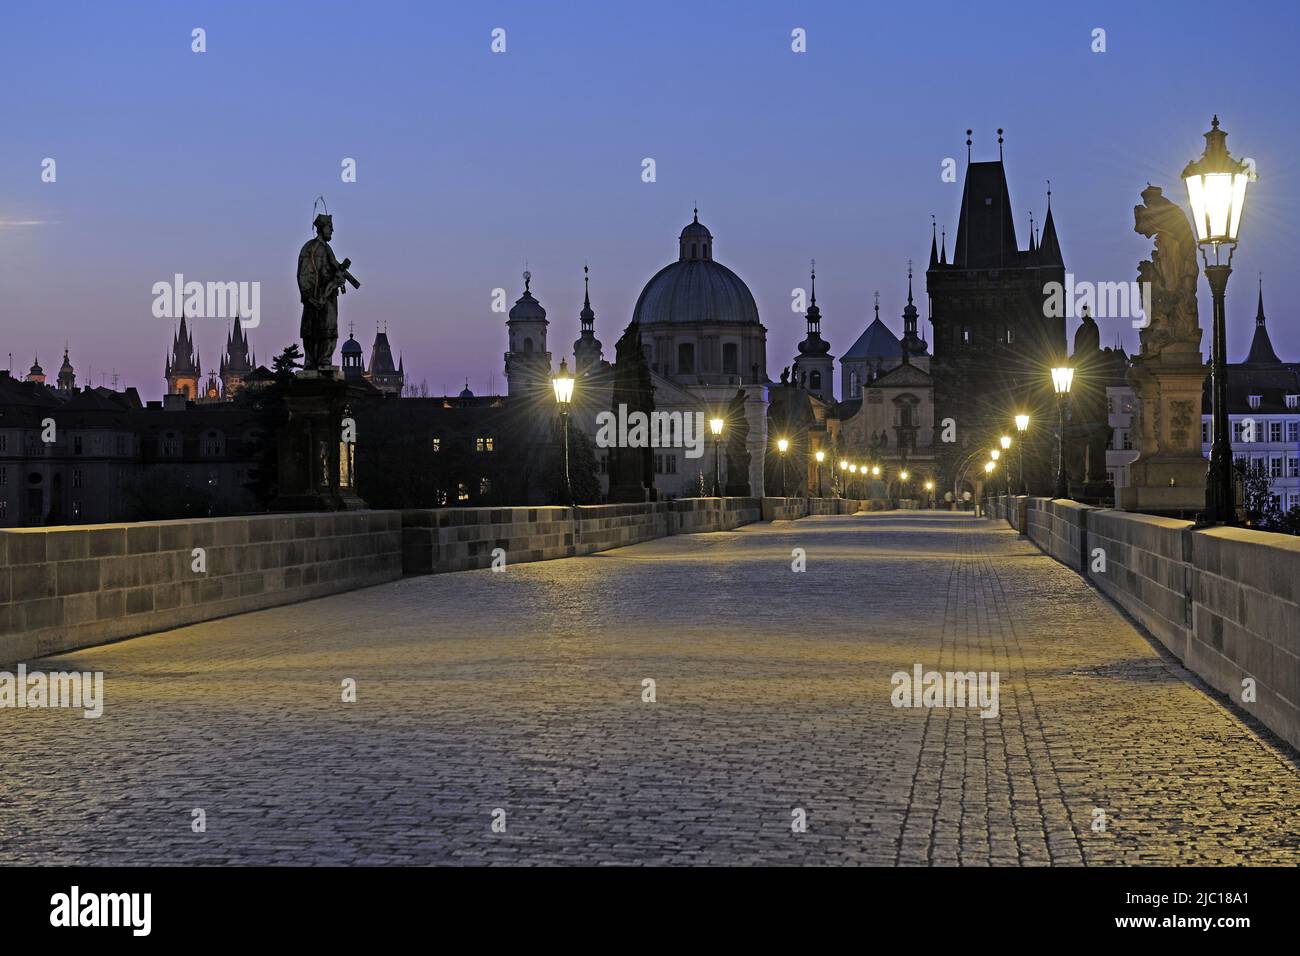 Nightshot of Charles Bridge in direction of the old town, Czech Republic, Prague Stock Photo